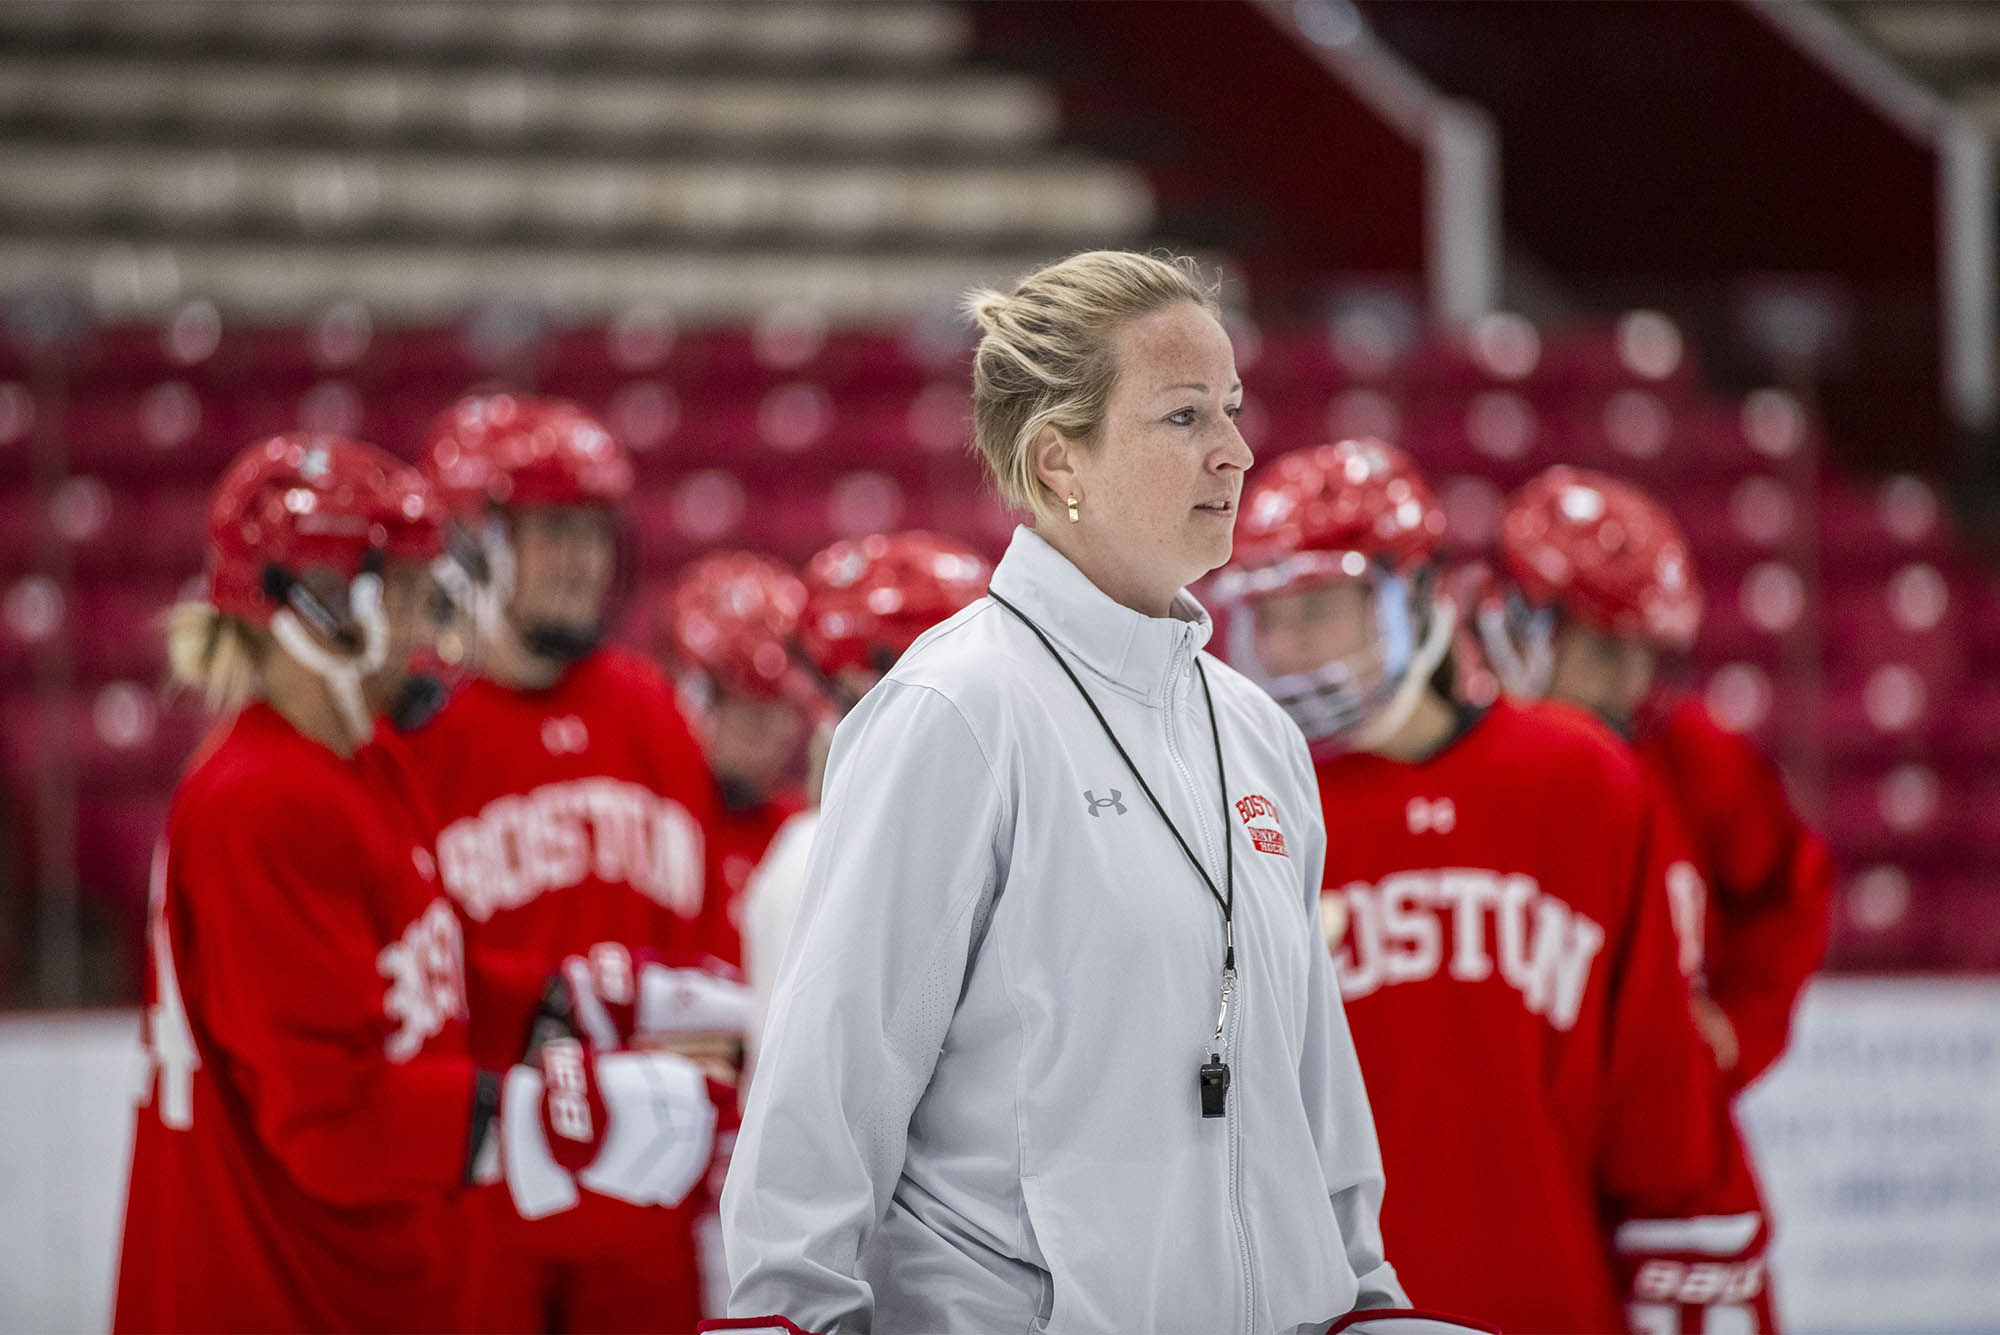 Photo: A blonde woman wearing a whistle around her neck stands in front of a group of womens hockey players in red jerseys